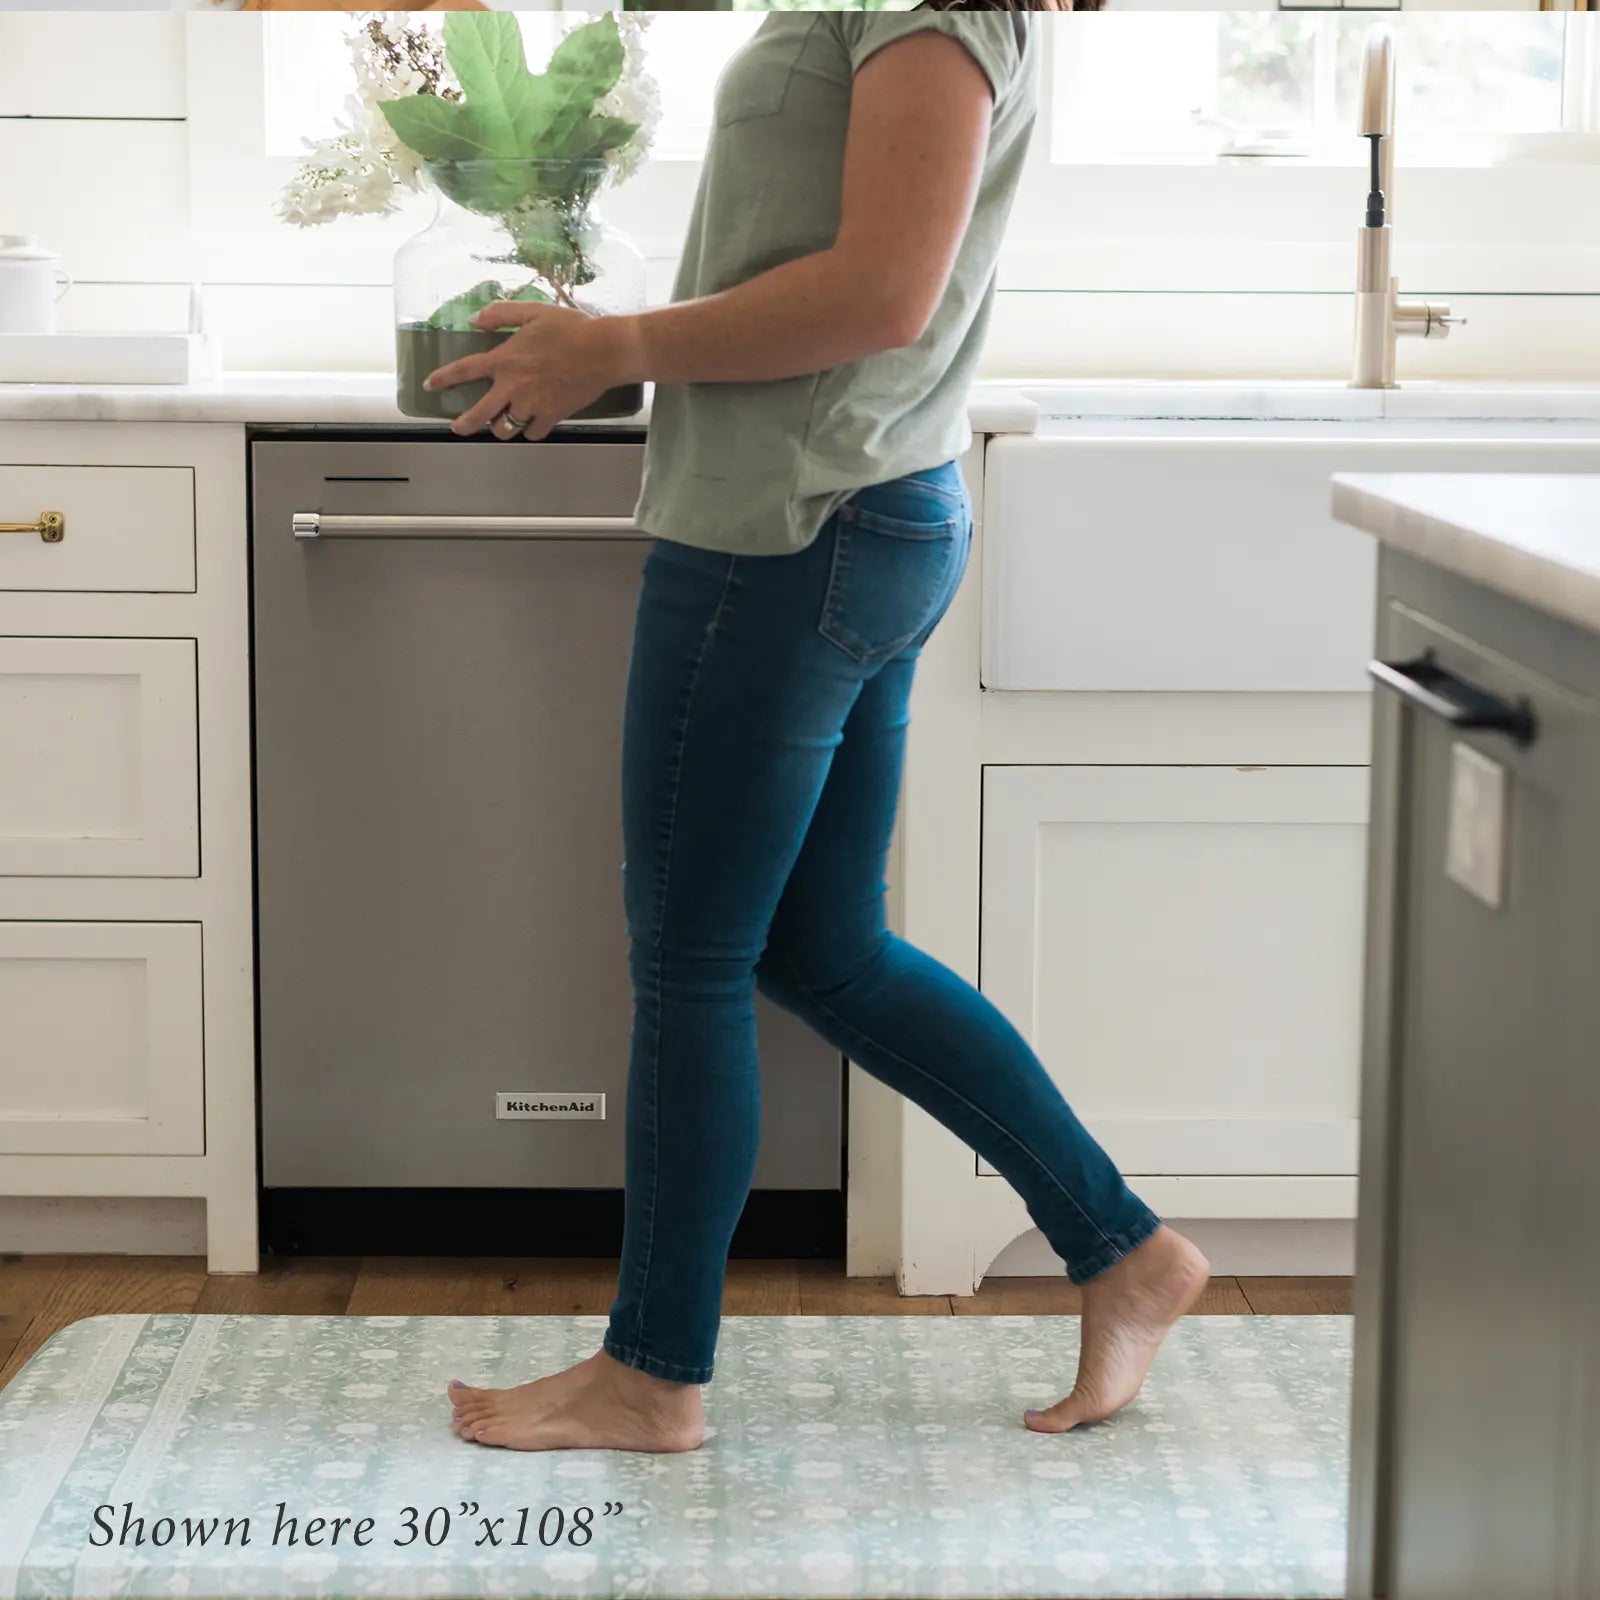 Nama standing mat Gemma white sage green floral in kitchen with woman shown in size size 30x108